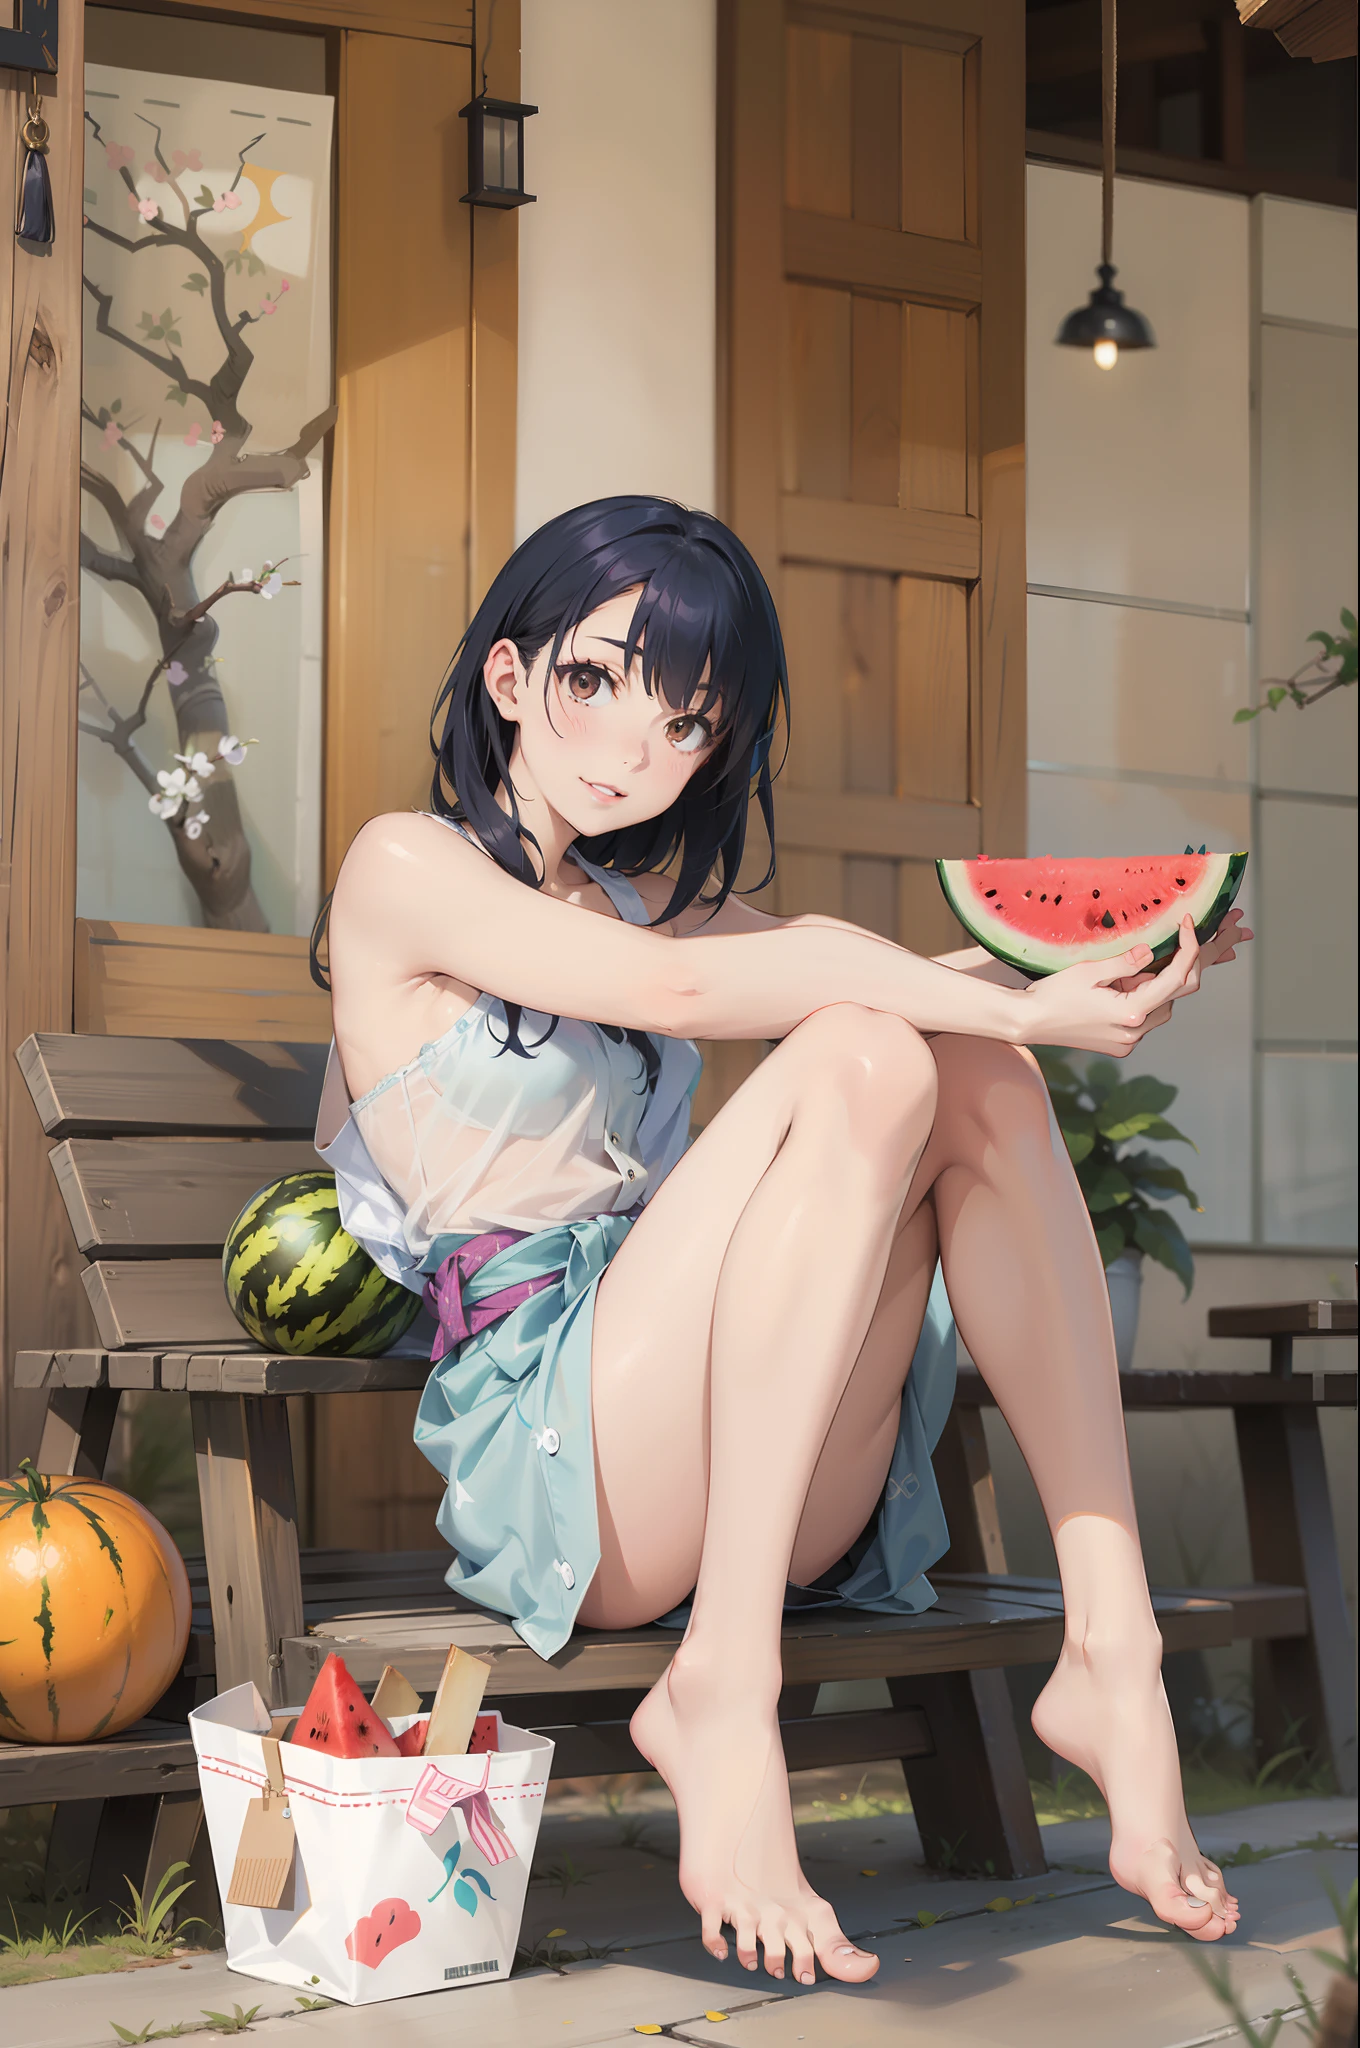 Alafed woman sitting on wooden bench with watermelon slices, Young Pretty Gravure Idol, Young skinny gravure idol, Young Sensual Gravure Idol, Realistic Young Gravure Idol, Young Gravure Idol, Japanese Models, Chiho, material is!!! Watermelon!!!, aya takano color style, Yoshitomo Nara